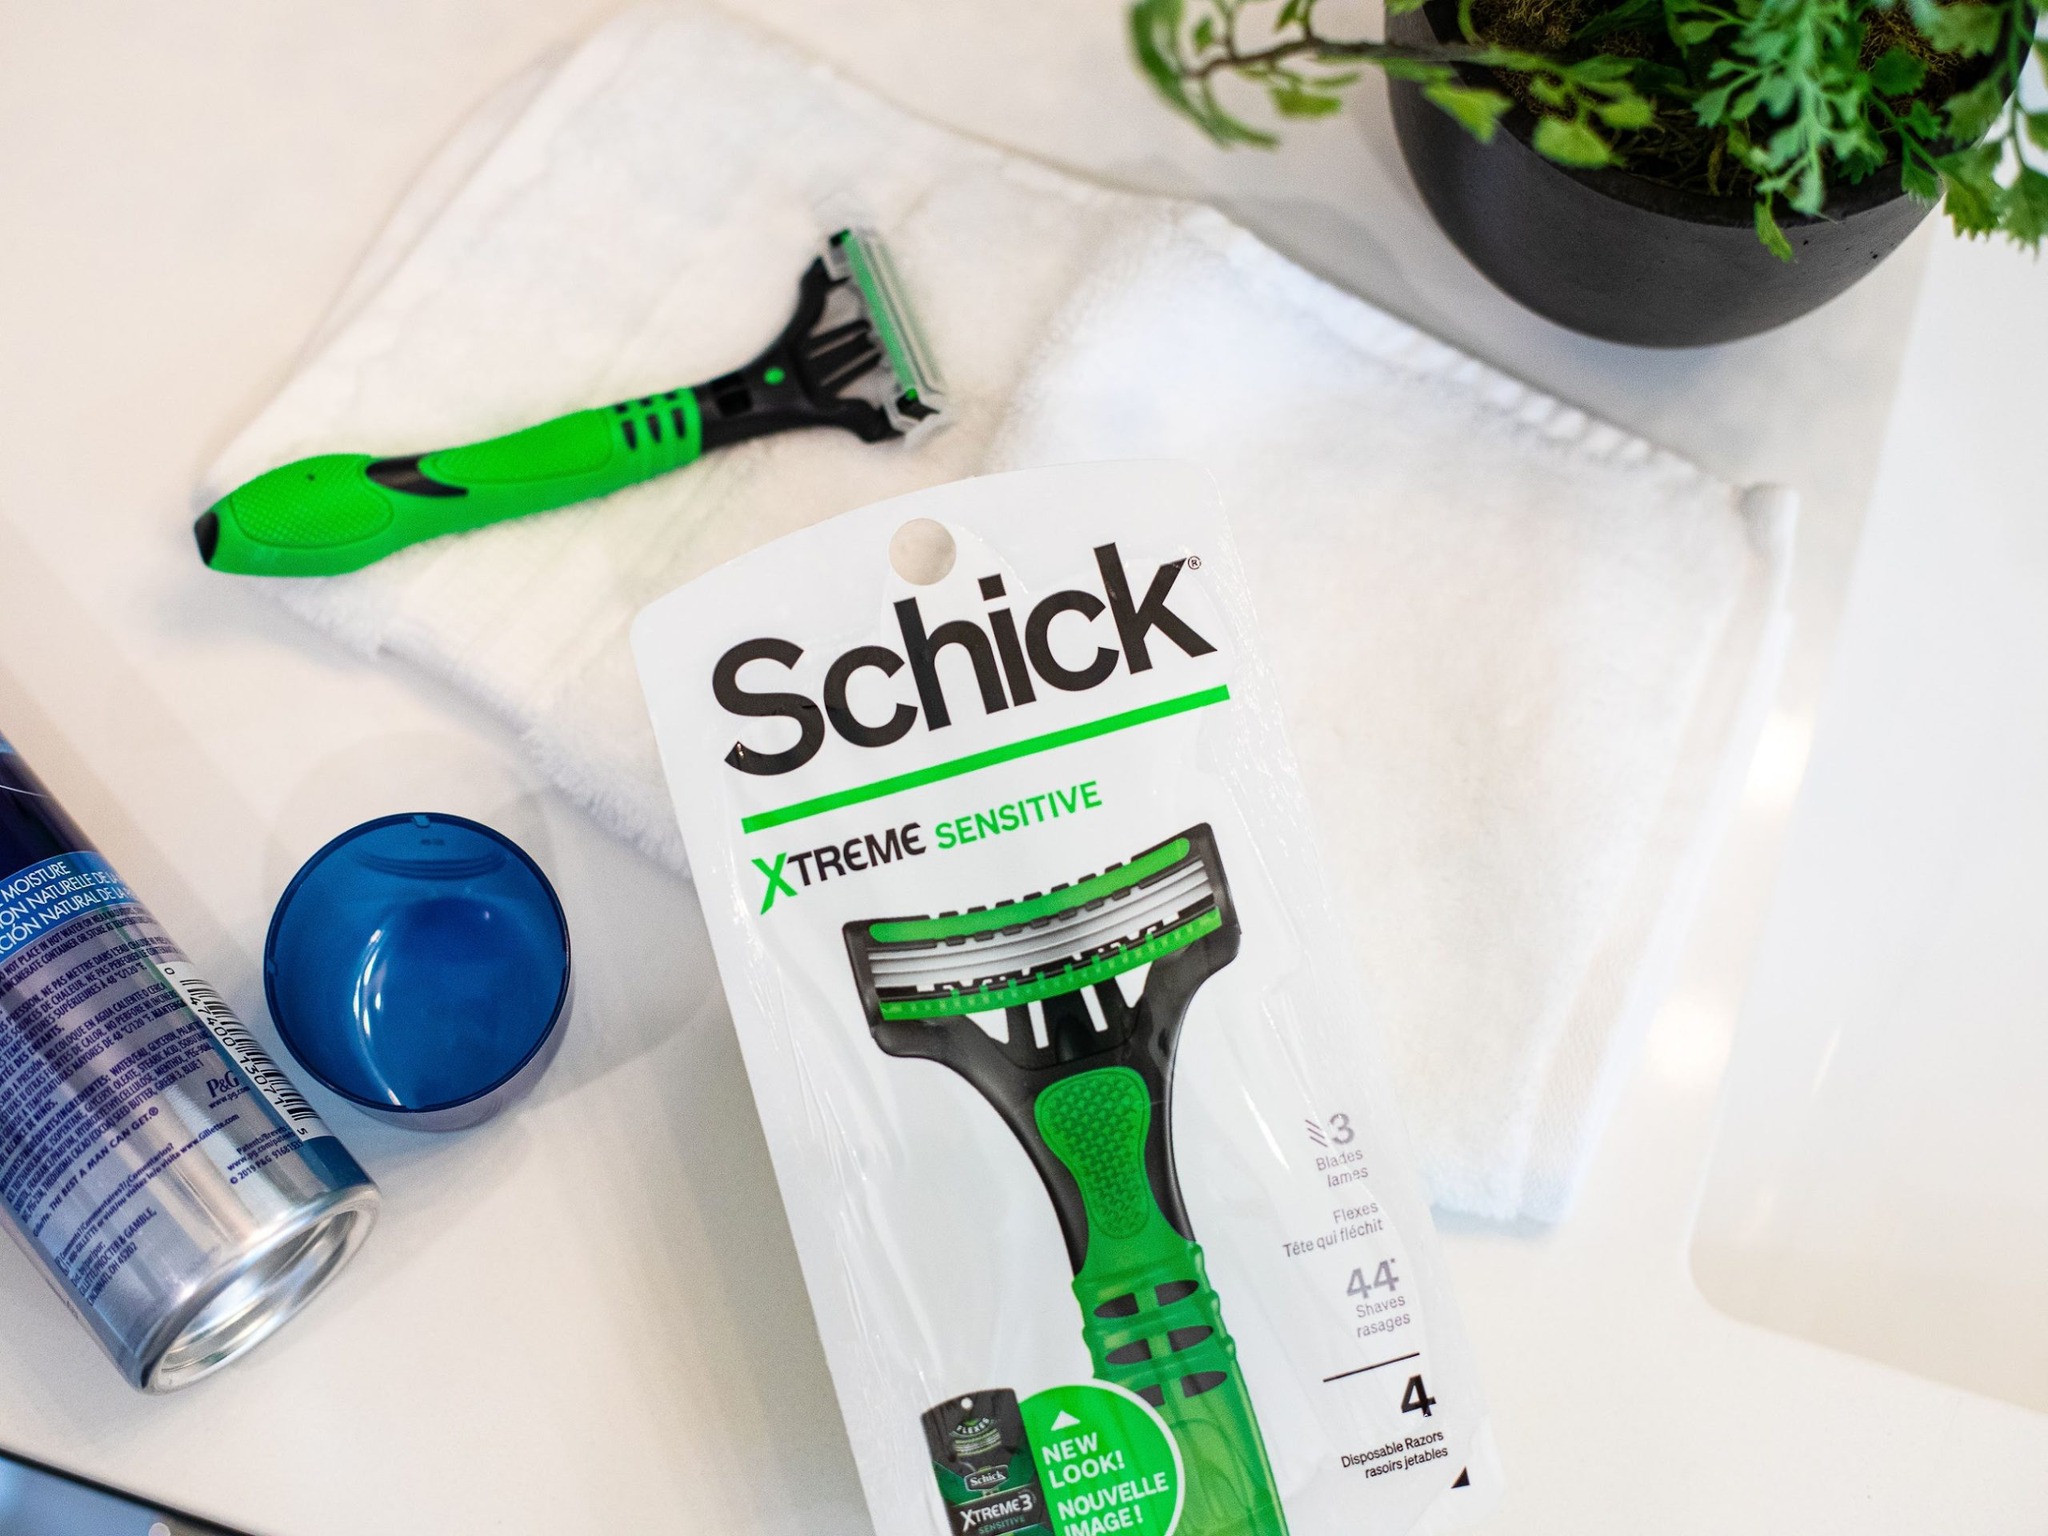 Schick Disposable Razors As Low As $3.99 At Kroger